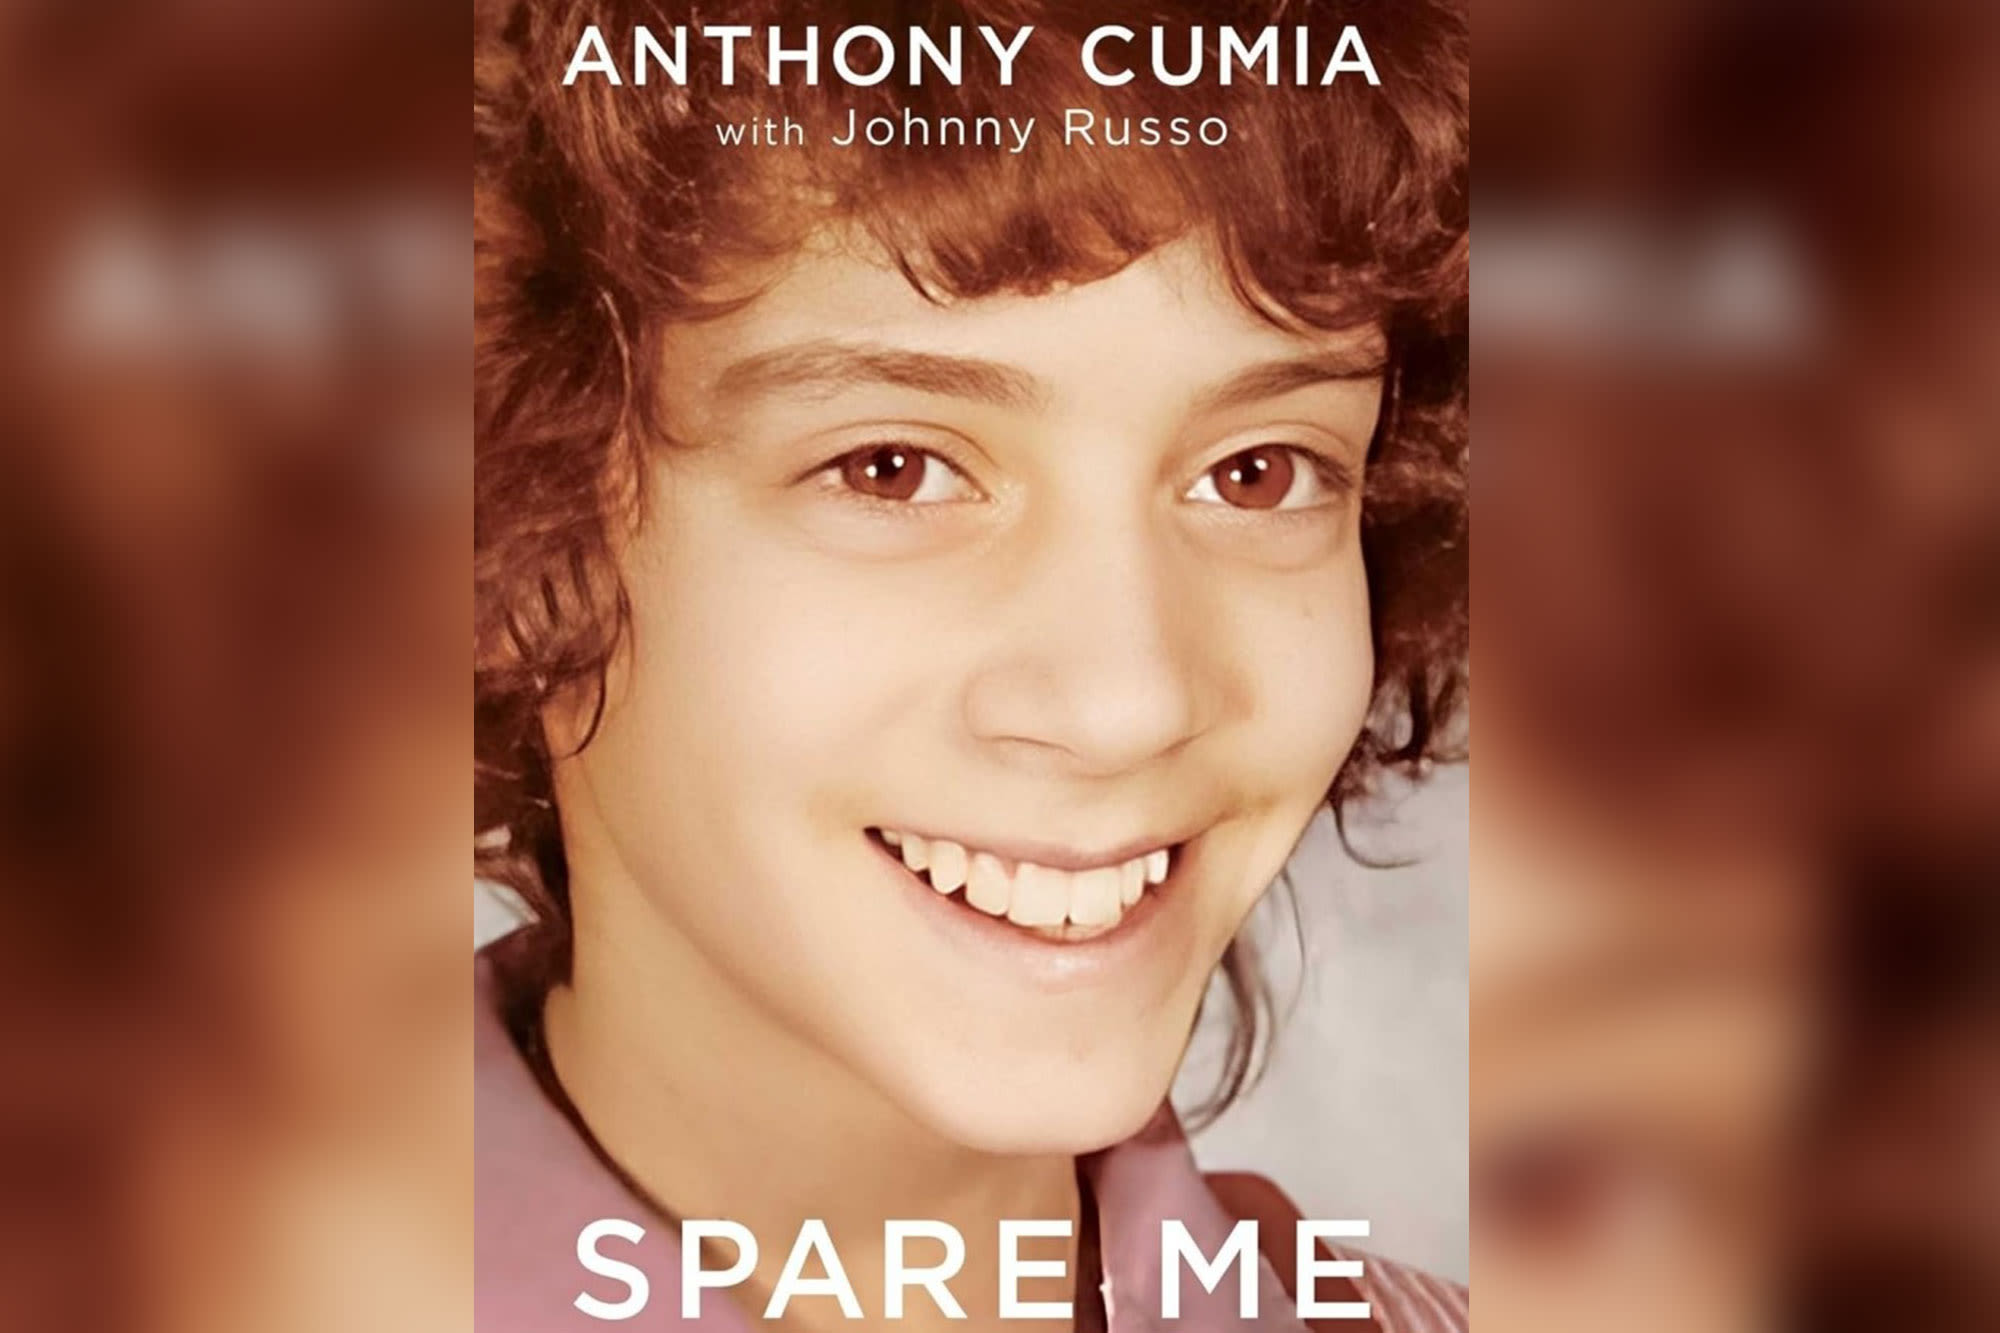 Anthony Cumia takes on the world with new book ‘Spare Me’